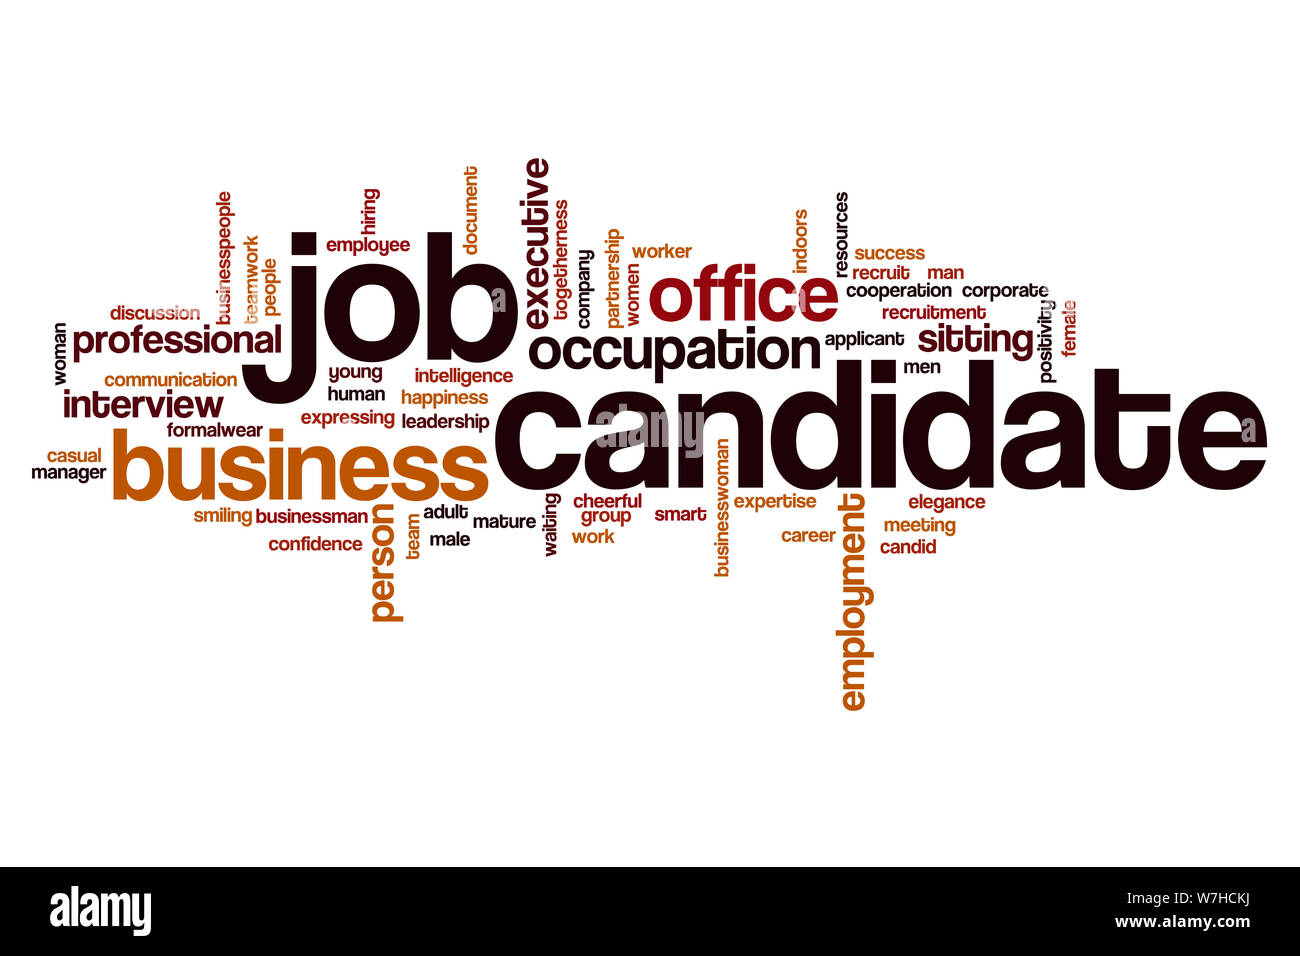 Job candidate word cloud concept Stock Photo